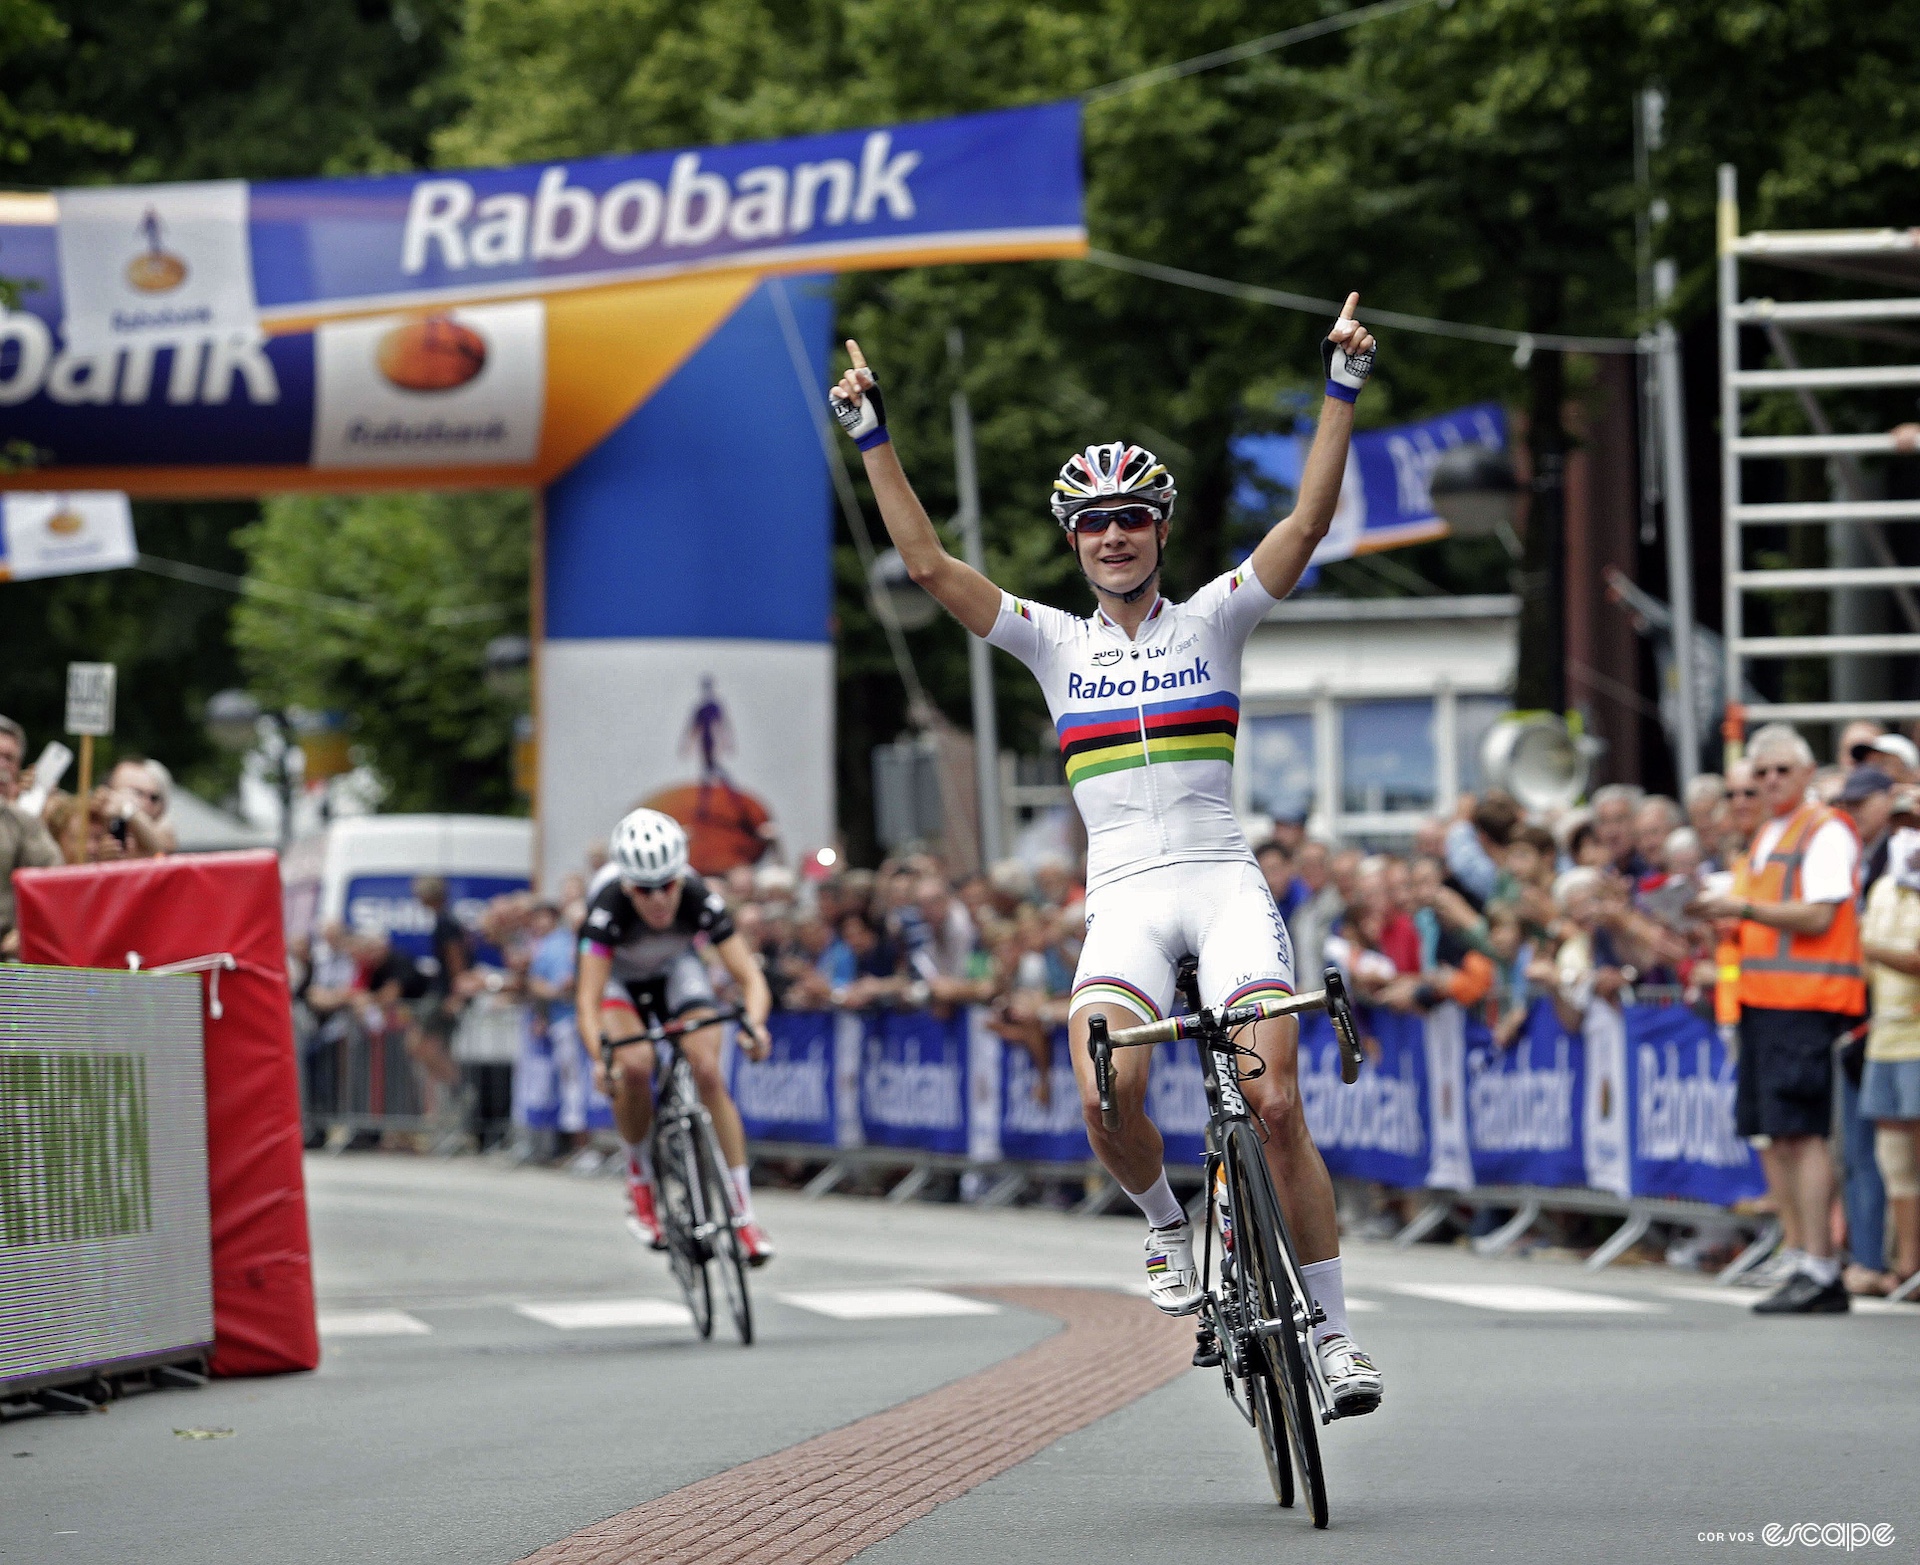 A woman raises her arms in victory as she wins a bike race